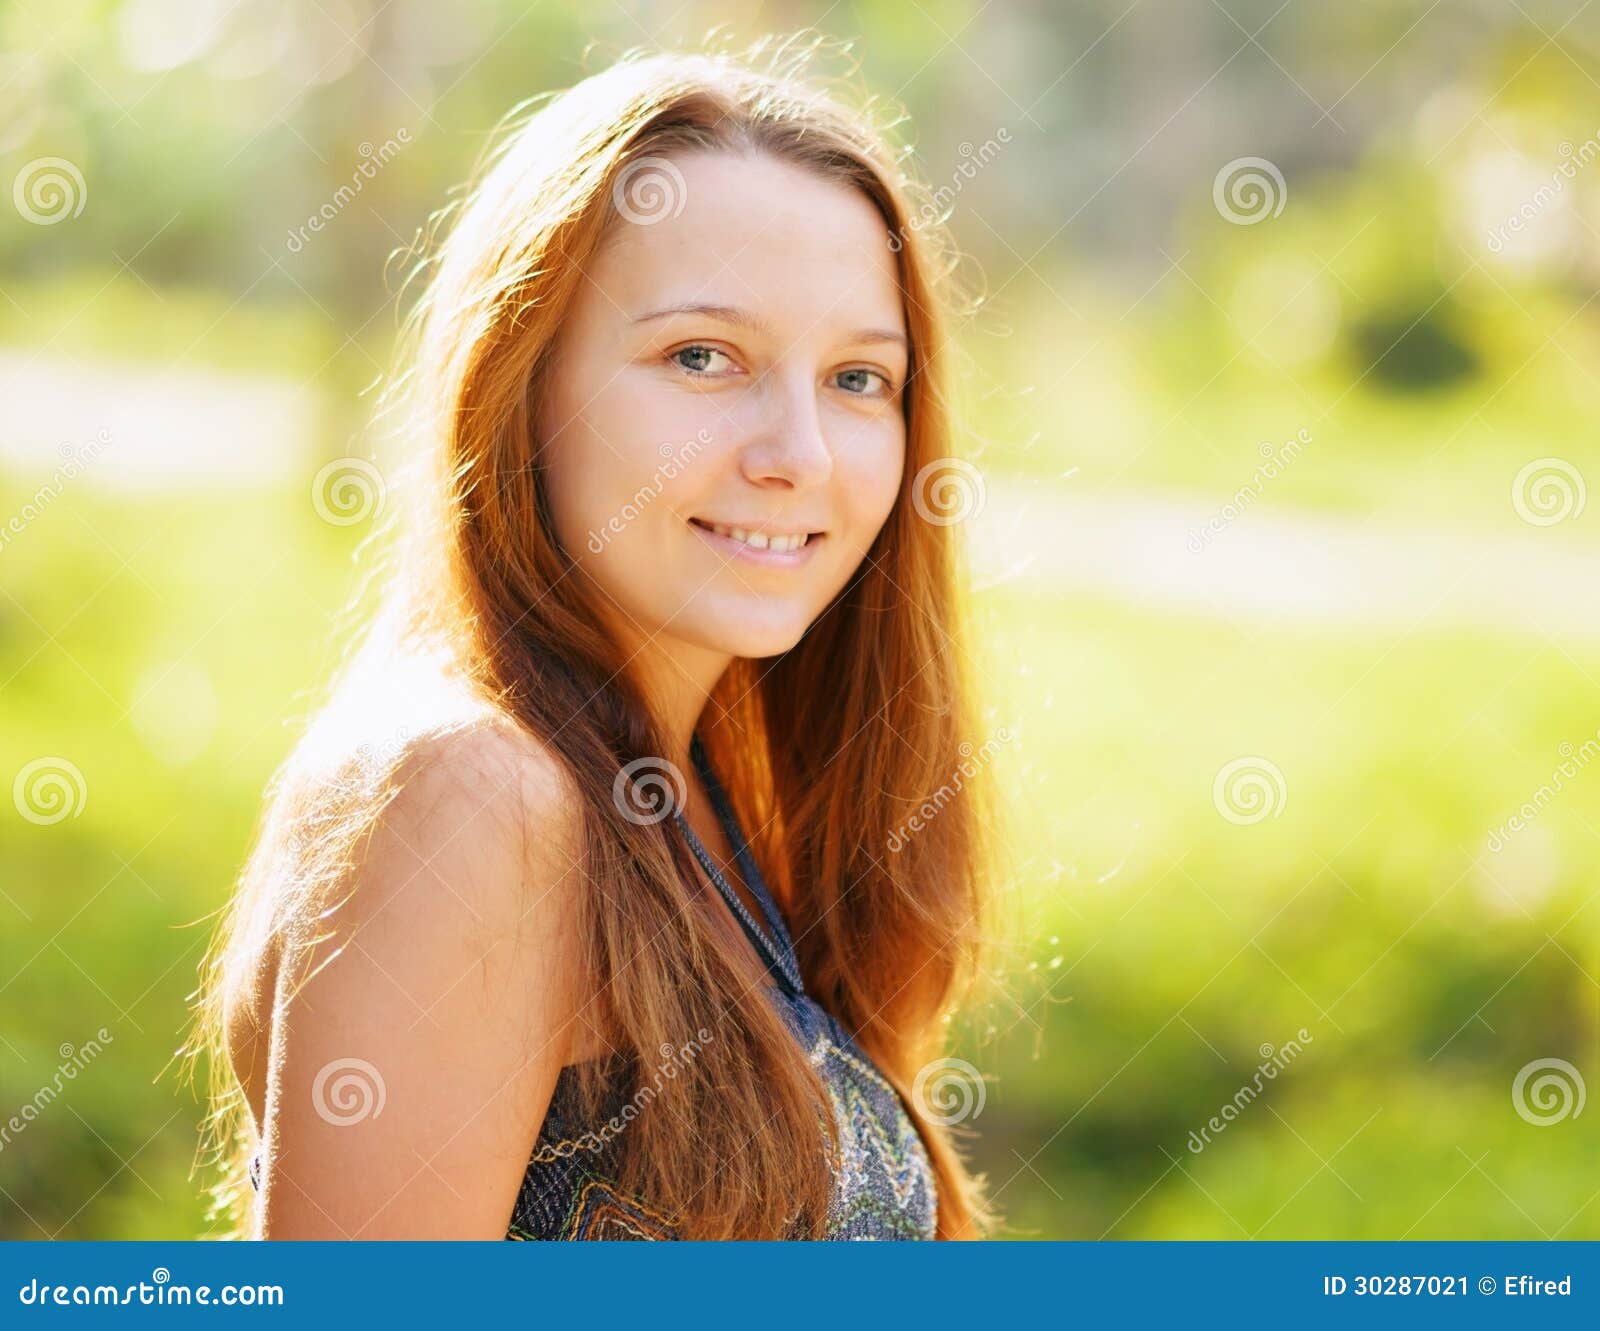 Portrait of Young Beautiful Woman Outdoors Stock Image - Image of face ...